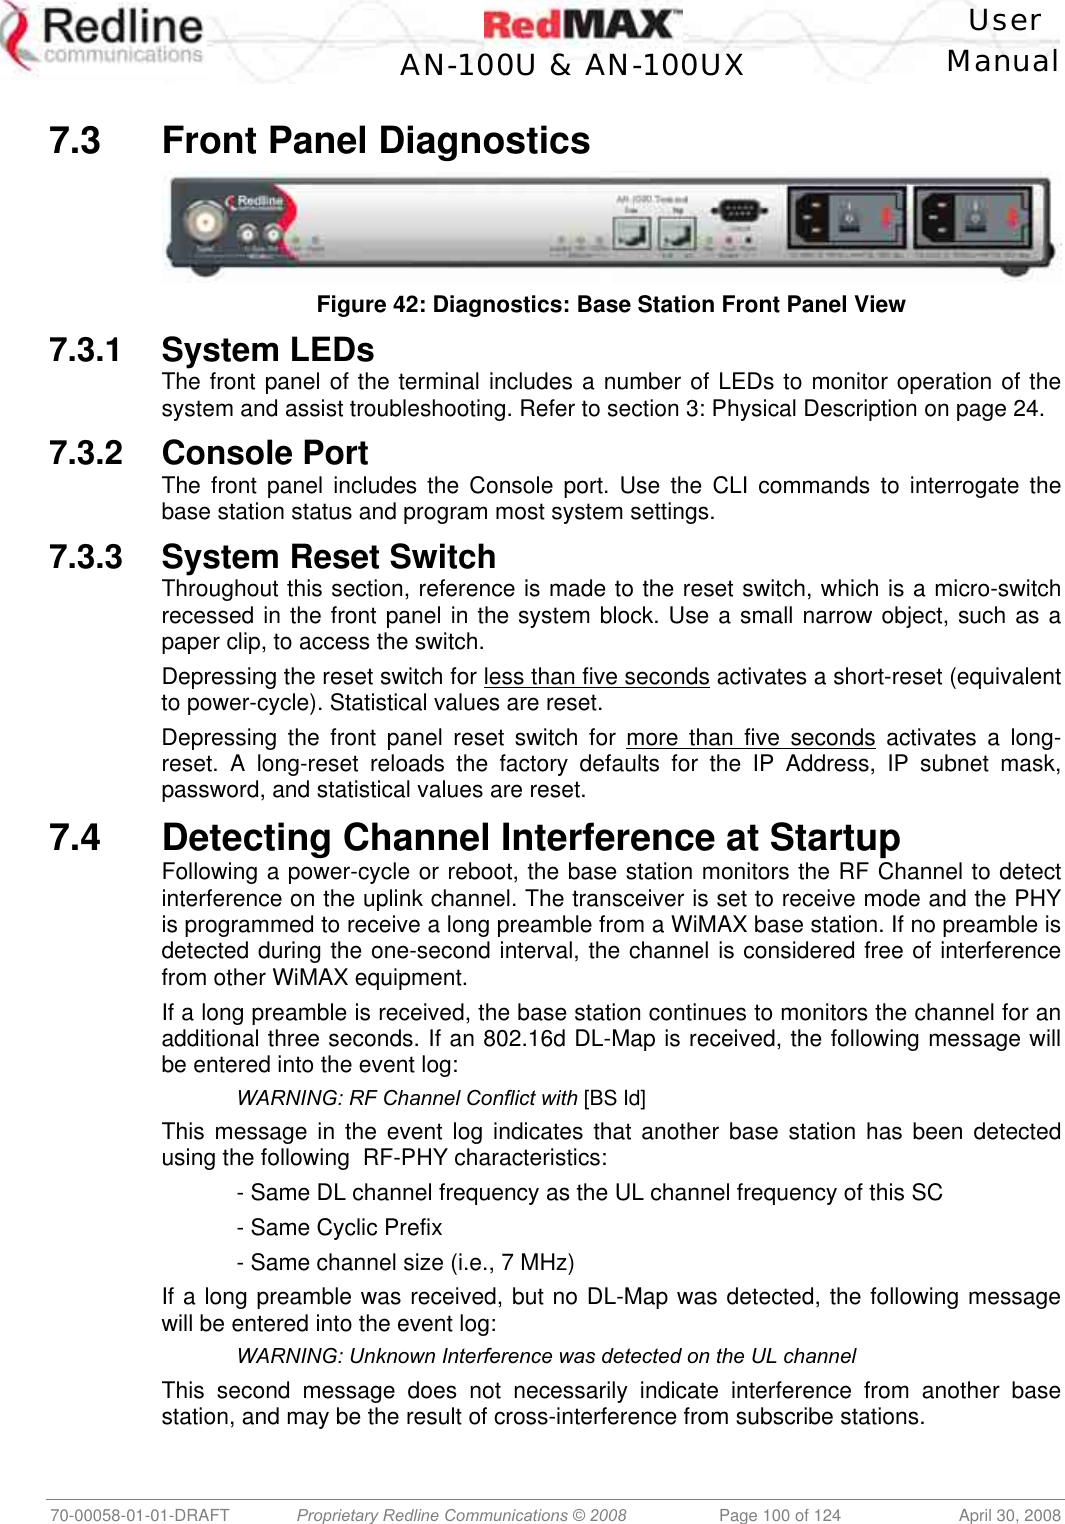    User  AN-100U &amp; AN-100UX Manual   70-00058-01-01-DRAFT  Proprietary Redline Communications © 2008   Page 100 of 124  April 30, 2008  7.3  Front Panel Diagnostics   Figure 42: Diagnostics: Base Station Front Panel View 7.3.1 System LEDs The front panel of the terminal includes a number of LEDs to monitor operation of the system and assist troubleshooting. Refer to section 3: Physical Description on page 24. 7.3.2 Console Port The front panel includes the Console port. Use the CLI commands to interrogate the base station status and program most system settings. 7.3.3 System Reset Switch Throughout this section, reference is made to the reset switch, which is a micro-switch recessed in the front panel in the system block. Use a small narrow object, such as a paper clip, to access the switch. Depressing the reset switch for less than five seconds activates a short-reset (equivalent to power-cycle). Statistical values are reset. Depressing the front panel reset switch for more than five seconds activates a long-reset. A long-reset reloads the factory defaults for the IP Address, IP subnet mask, password, and statistical values are reset. 7.4  Detecting Channel Interference at Startup Following a power-cycle or reboot, the base station monitors the RF Channel to detect interference on the uplink channel. The transceiver is set to receive mode and the PHY is programmed to receive a long preamble from a WiMAX base station. If no preamble is detected during the one-second interval, the channel is considered free of interference from other WiMAX equipment. If a long preamble is received, the base station continues to monitors the channel for an additional three seconds. If an 802.16d DL-Map is received, the following message will be entered into the event log:   WARNING: RF Channel Conflict with [BS Id] This message in the event log indicates that another base station has been detected using the following  RF-PHY characteristics:   - Same DL channel frequency as the UL channel frequency of this SC   - Same Cyclic Prefix   - Same channel size (i.e., 7 MHz) If a long preamble was received, but no DL-Map was detected, the following message will be entered into the event log:  WARNING: Unknown Interference was detected on the UL channel This second message does not necessarily indicate interference from another base station, and may be the result of cross-interference from subscribe stations. 